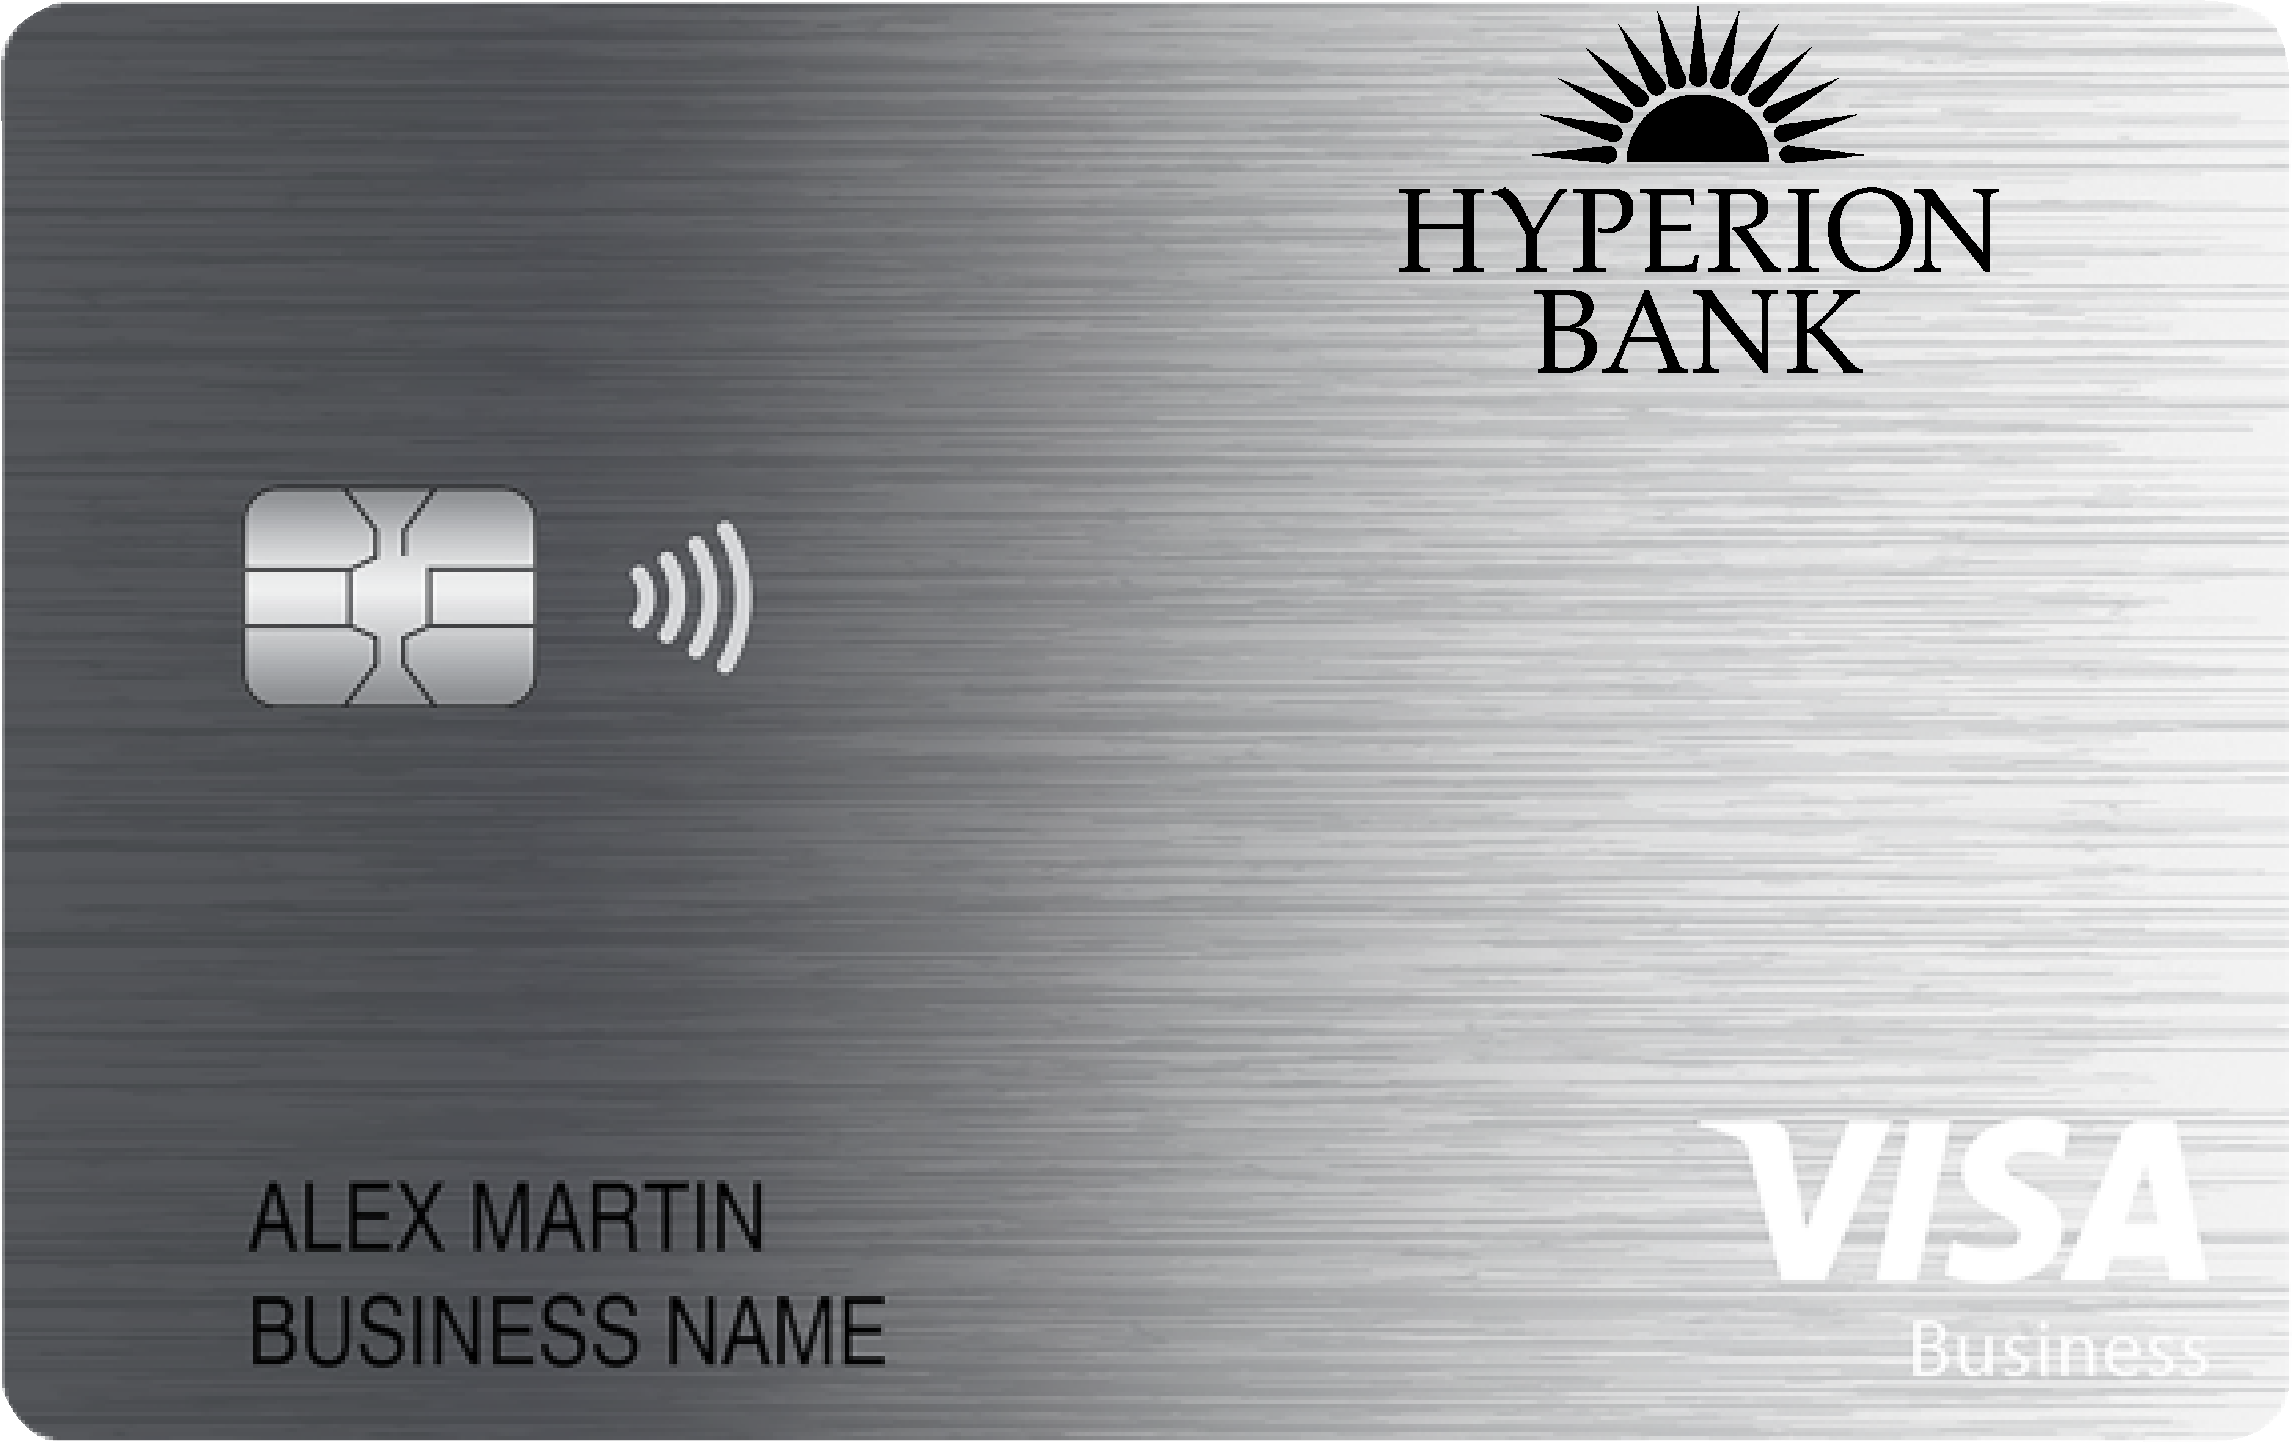 Hyperion Bank Business Cash Preferred Card